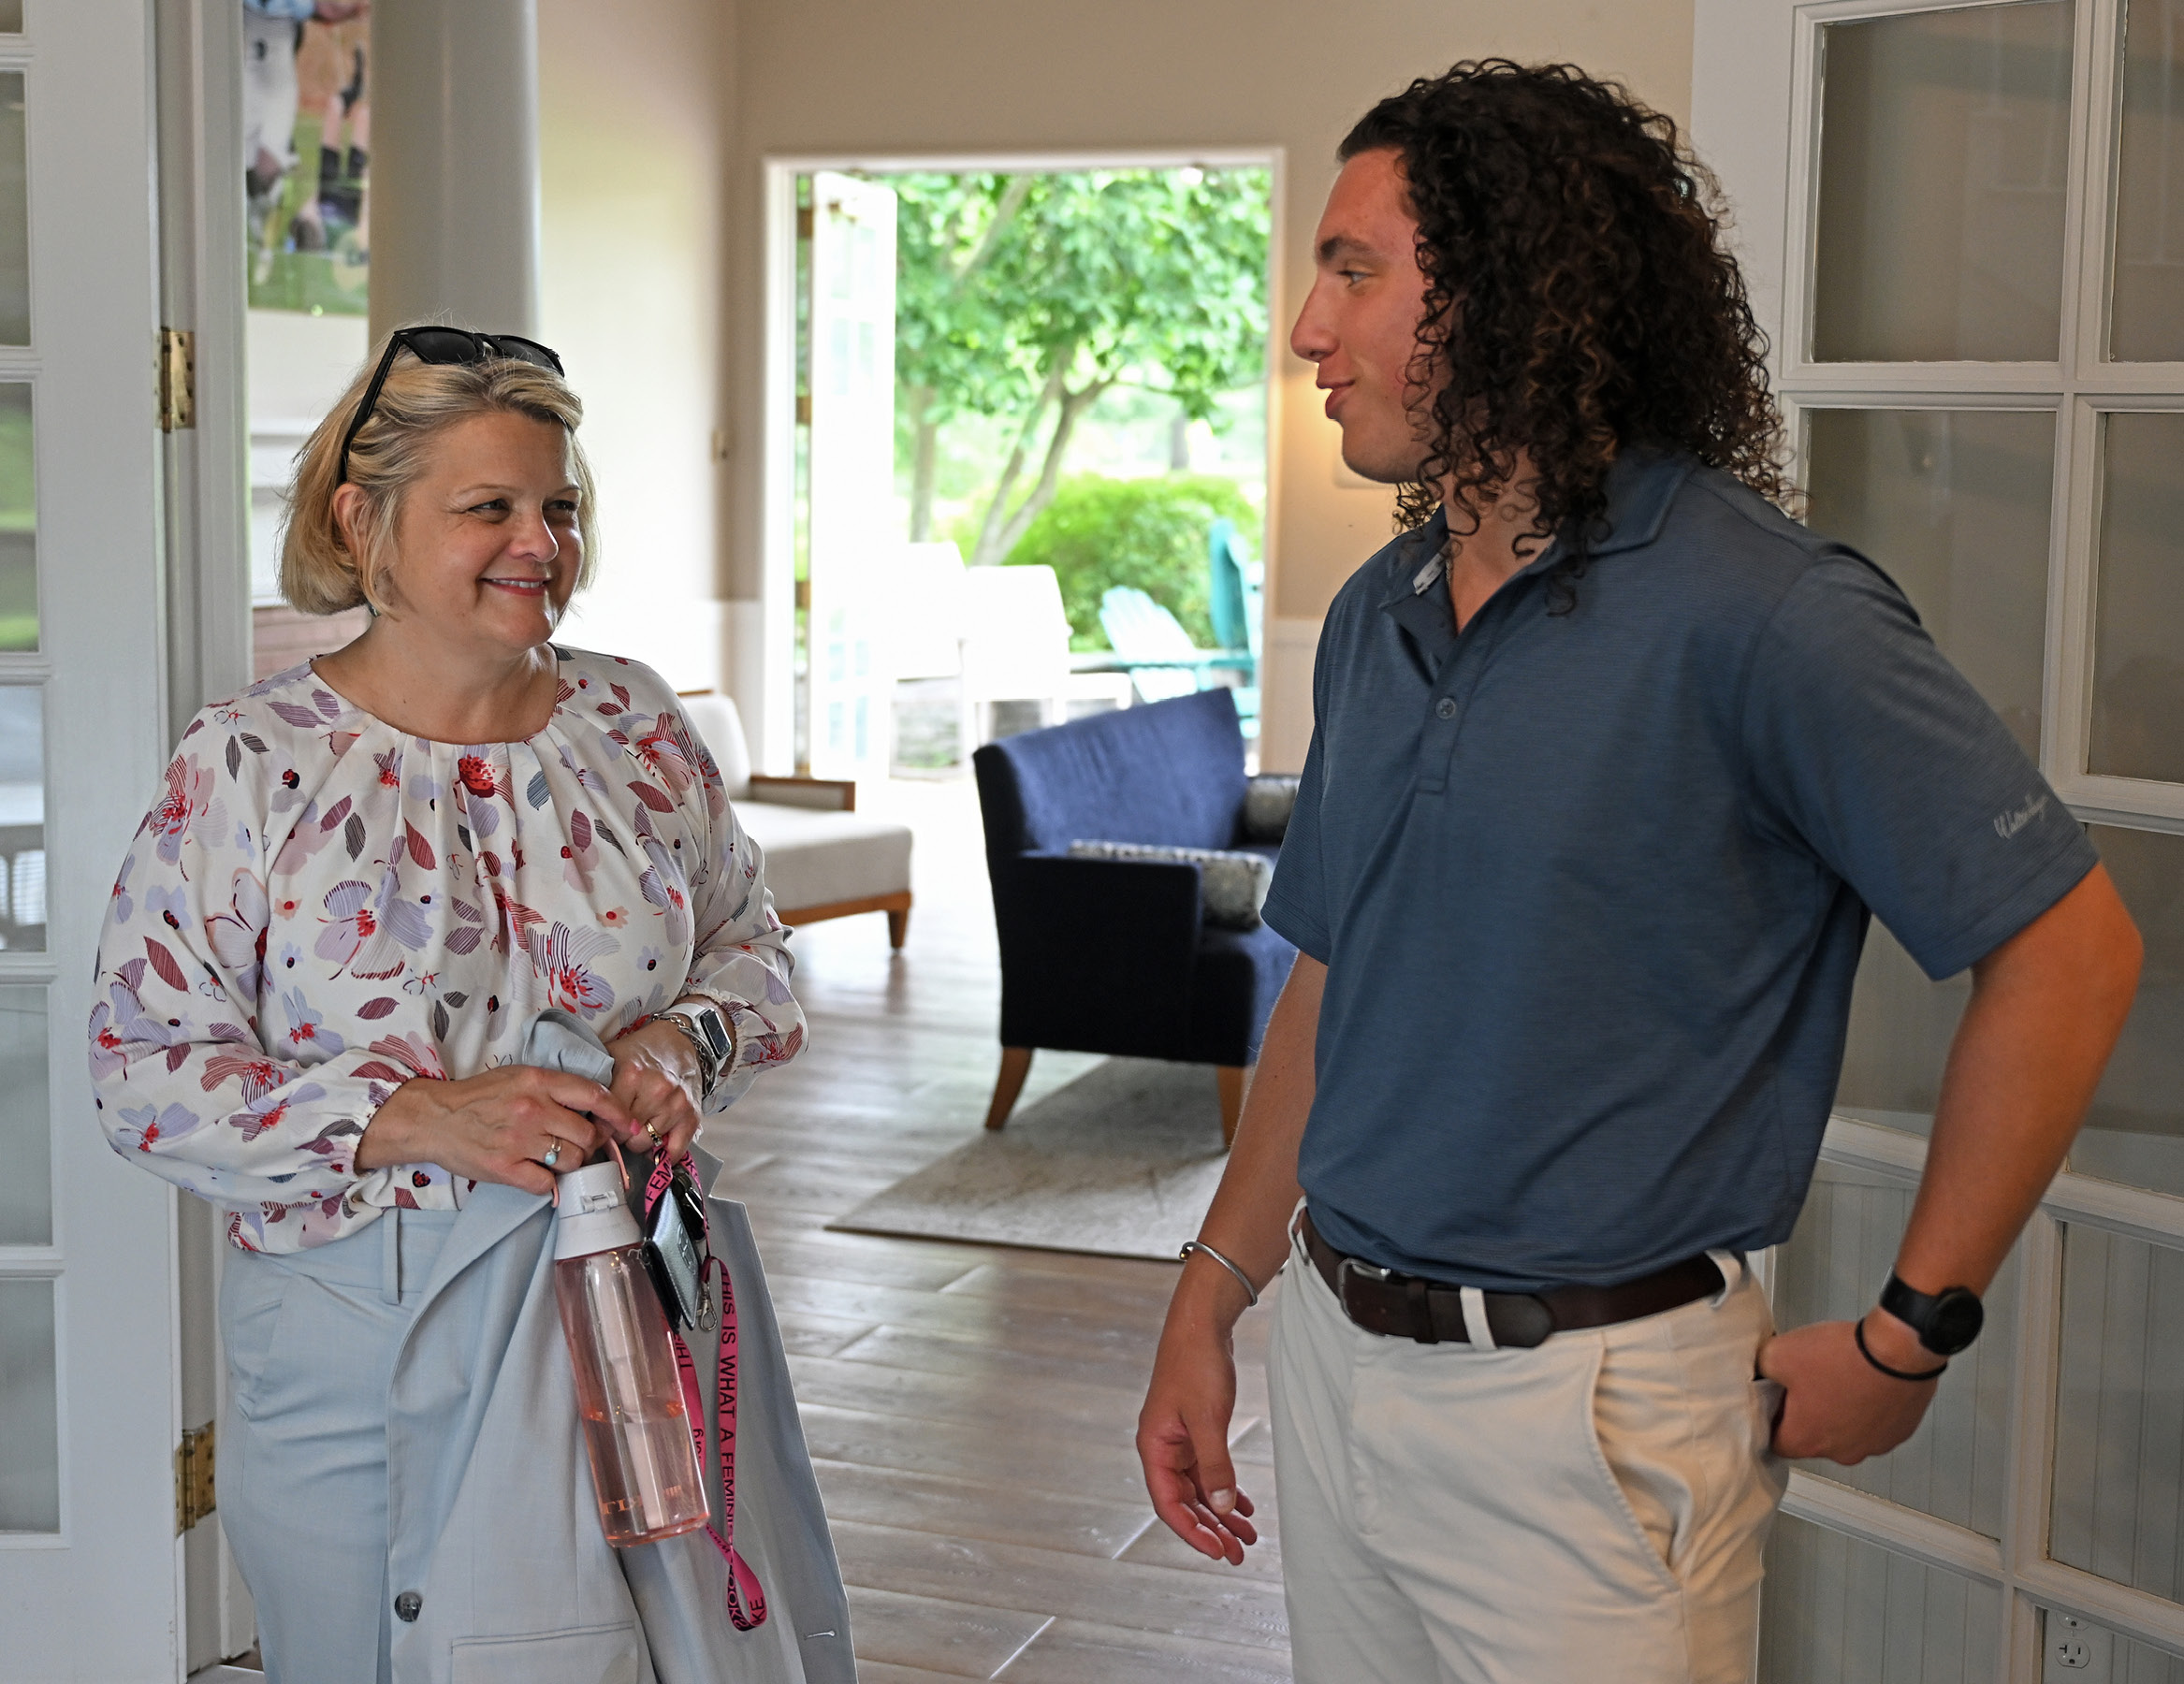 President Andrea Chapdelaine meets with a staff member during a tour of campus on her first day.